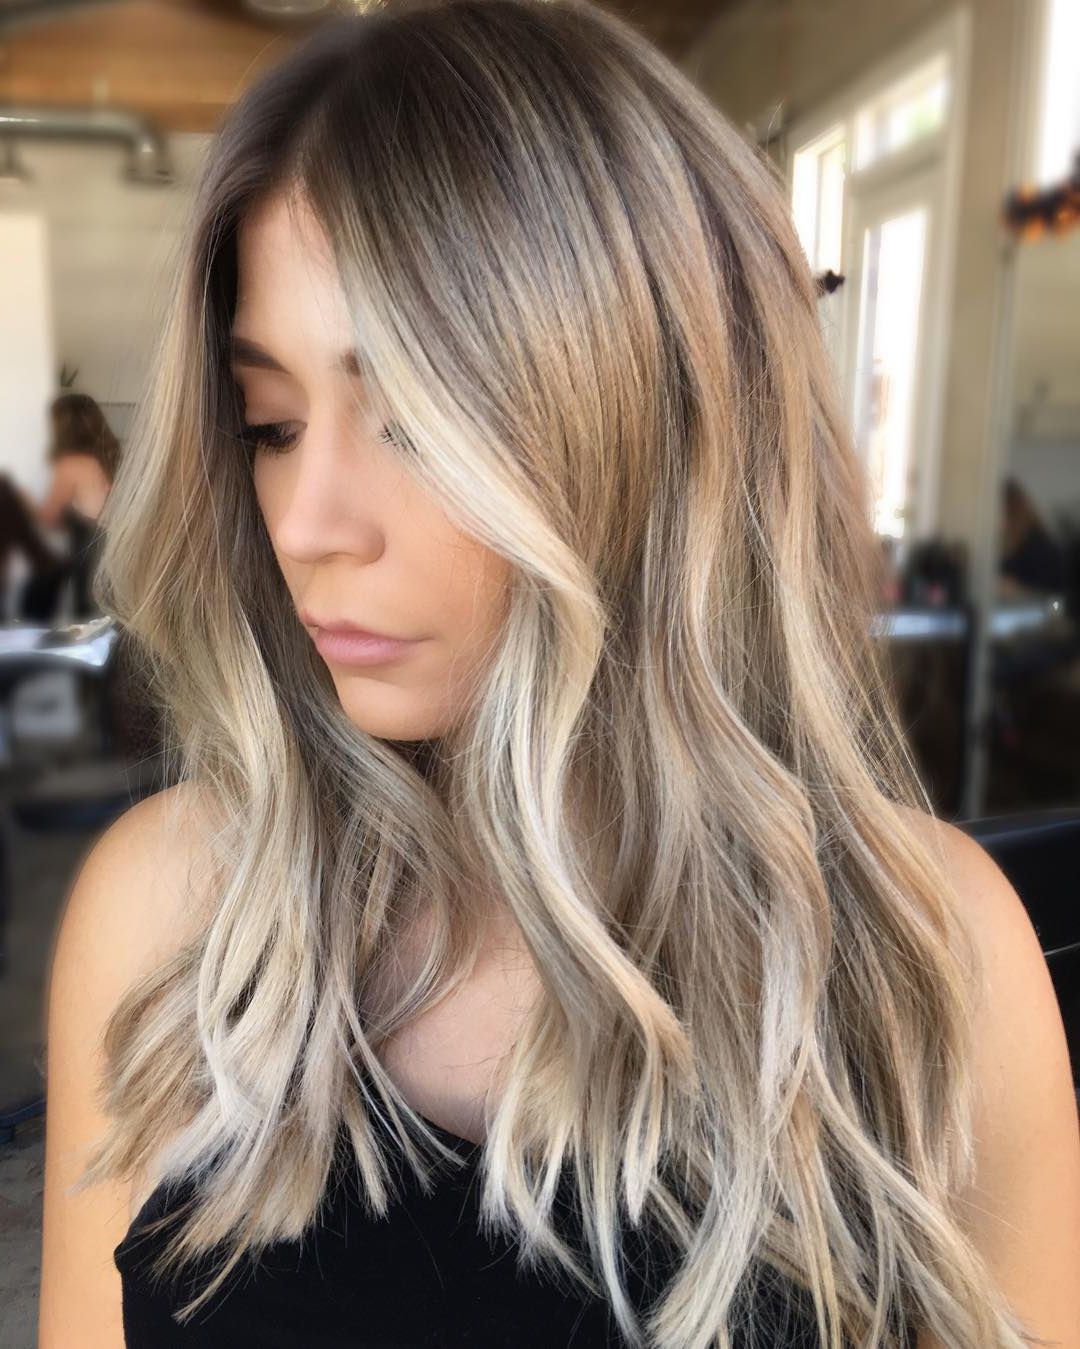 10 Ash Blonde Hairstyles For All Skin Tones 2019 For Well Known Choppy Waves Hairstyles (Gallery 20 of 20)